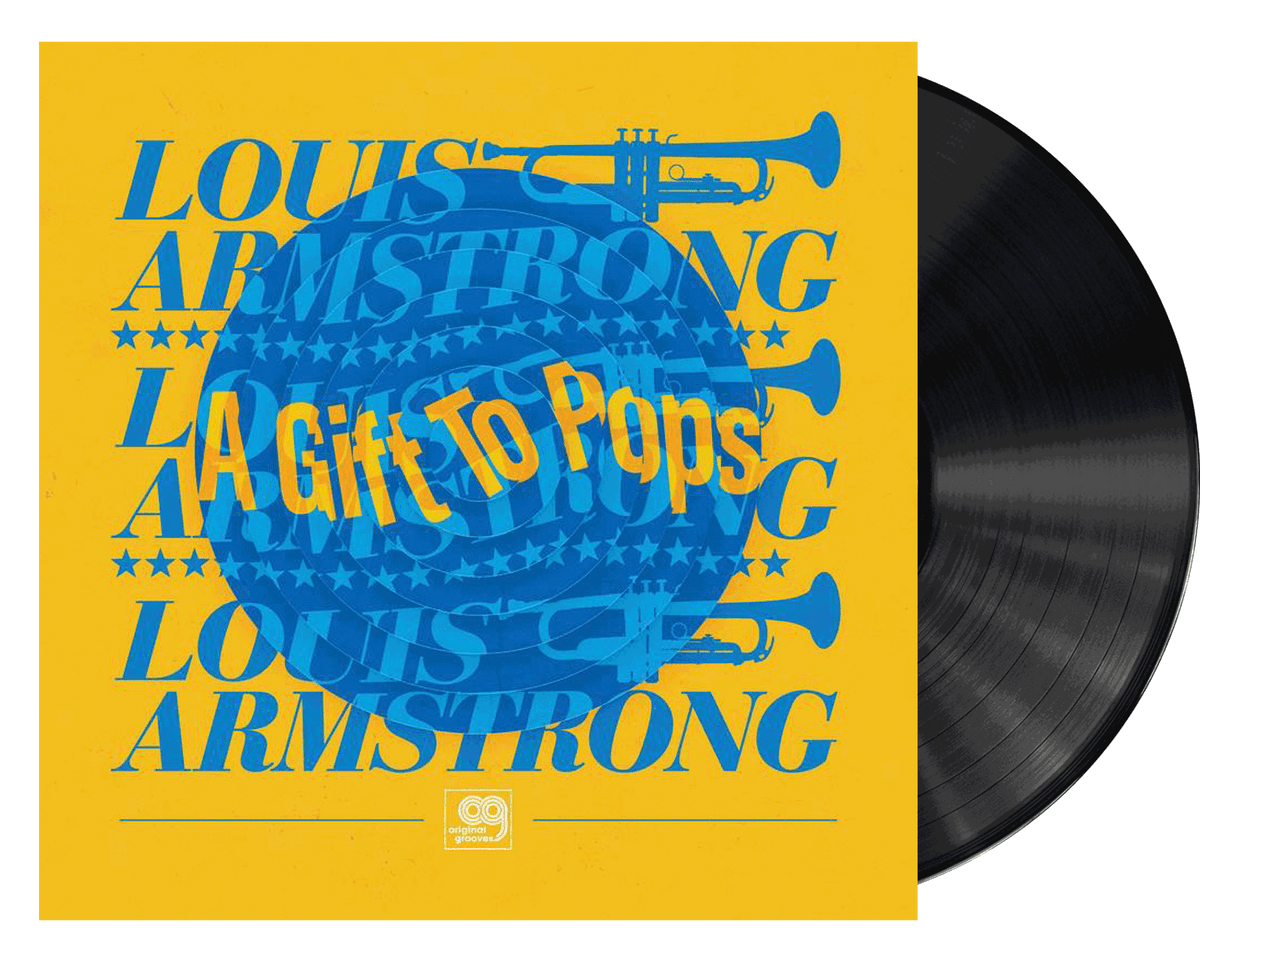 Original Grooves: A Gift To Pops - Louis Armstrong All Stars (12 Inch Vinyl)  - VP Reggae